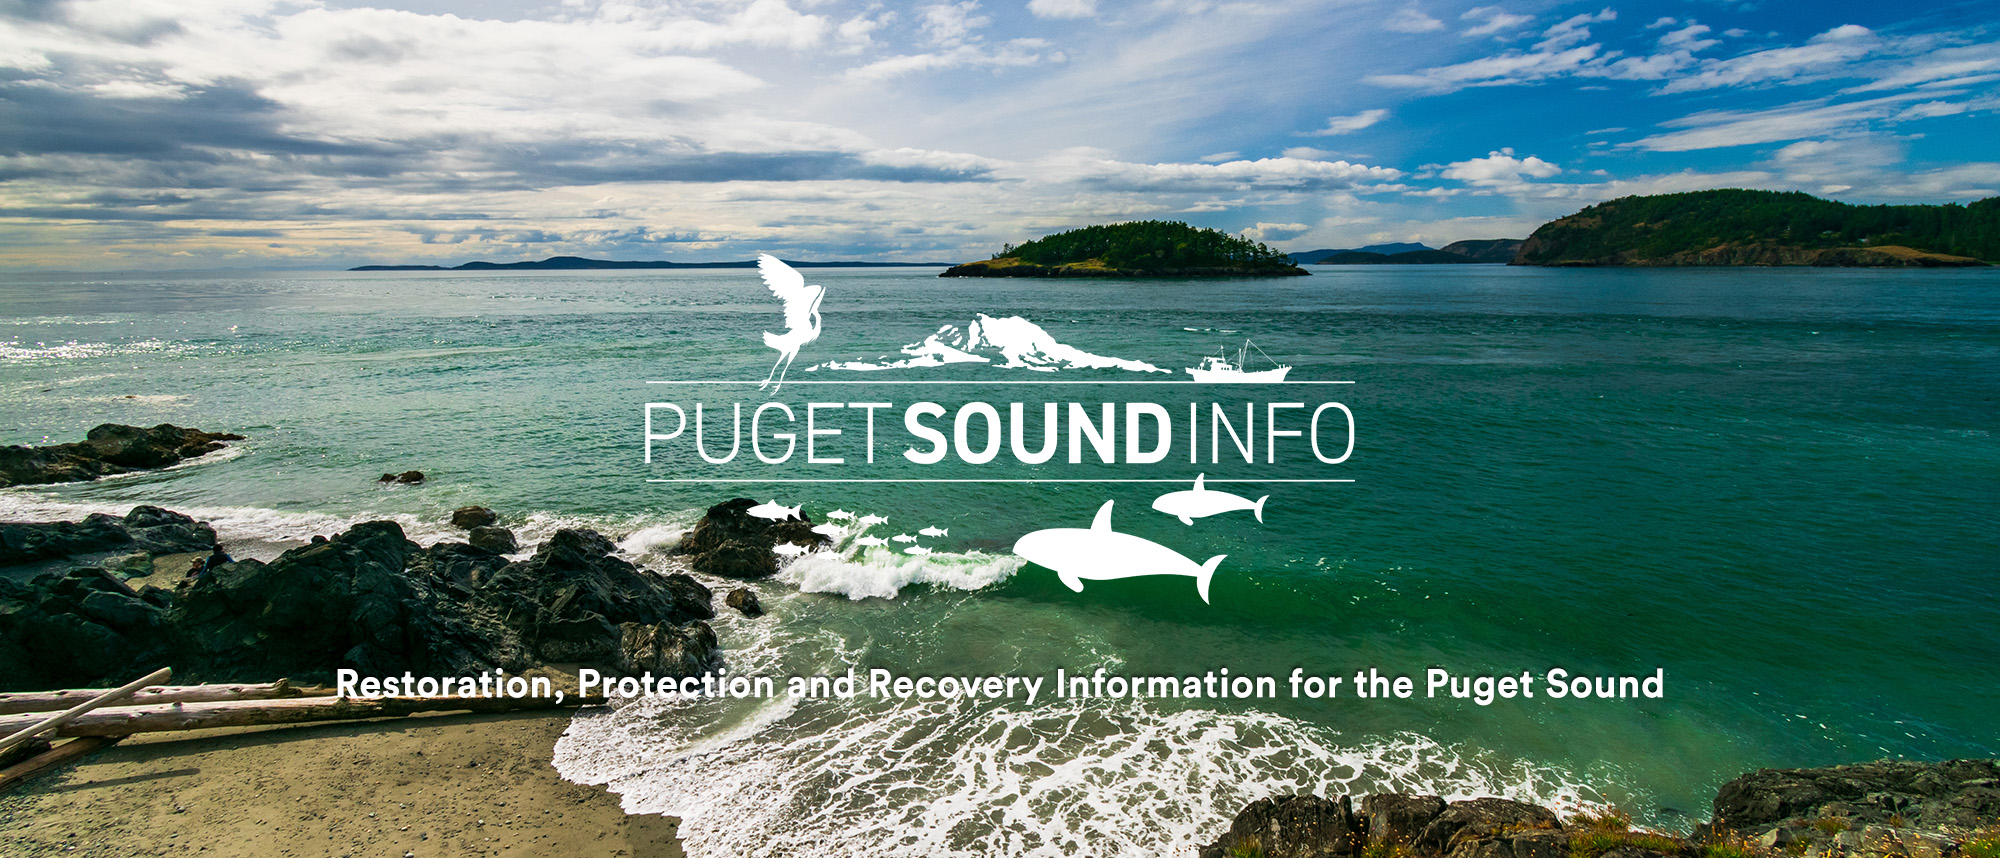 Puget Sound Info title image: Puget Sound, sky, and mountains